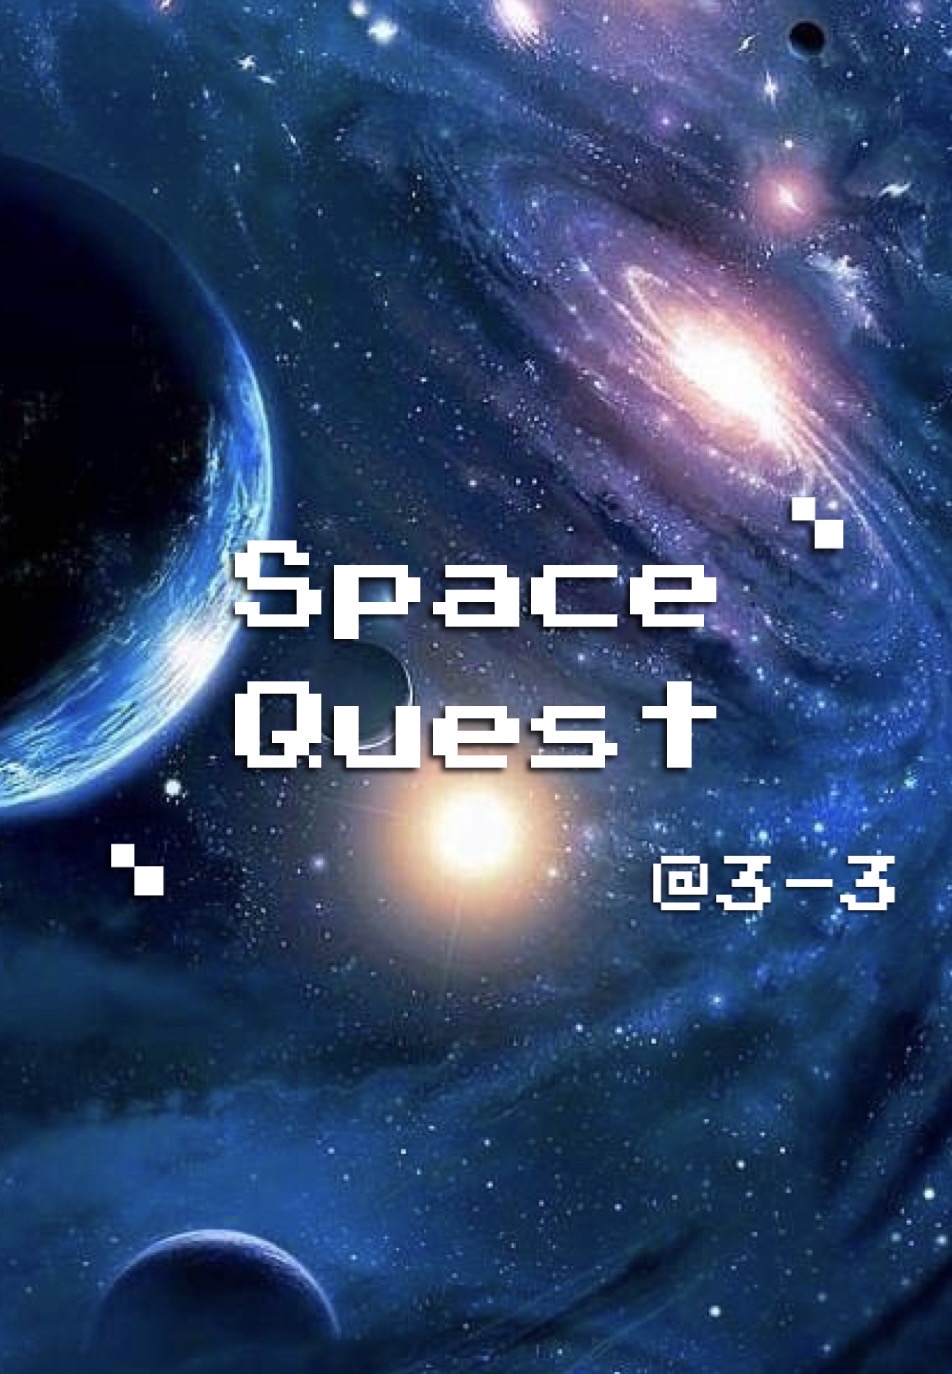 SPACE Quest